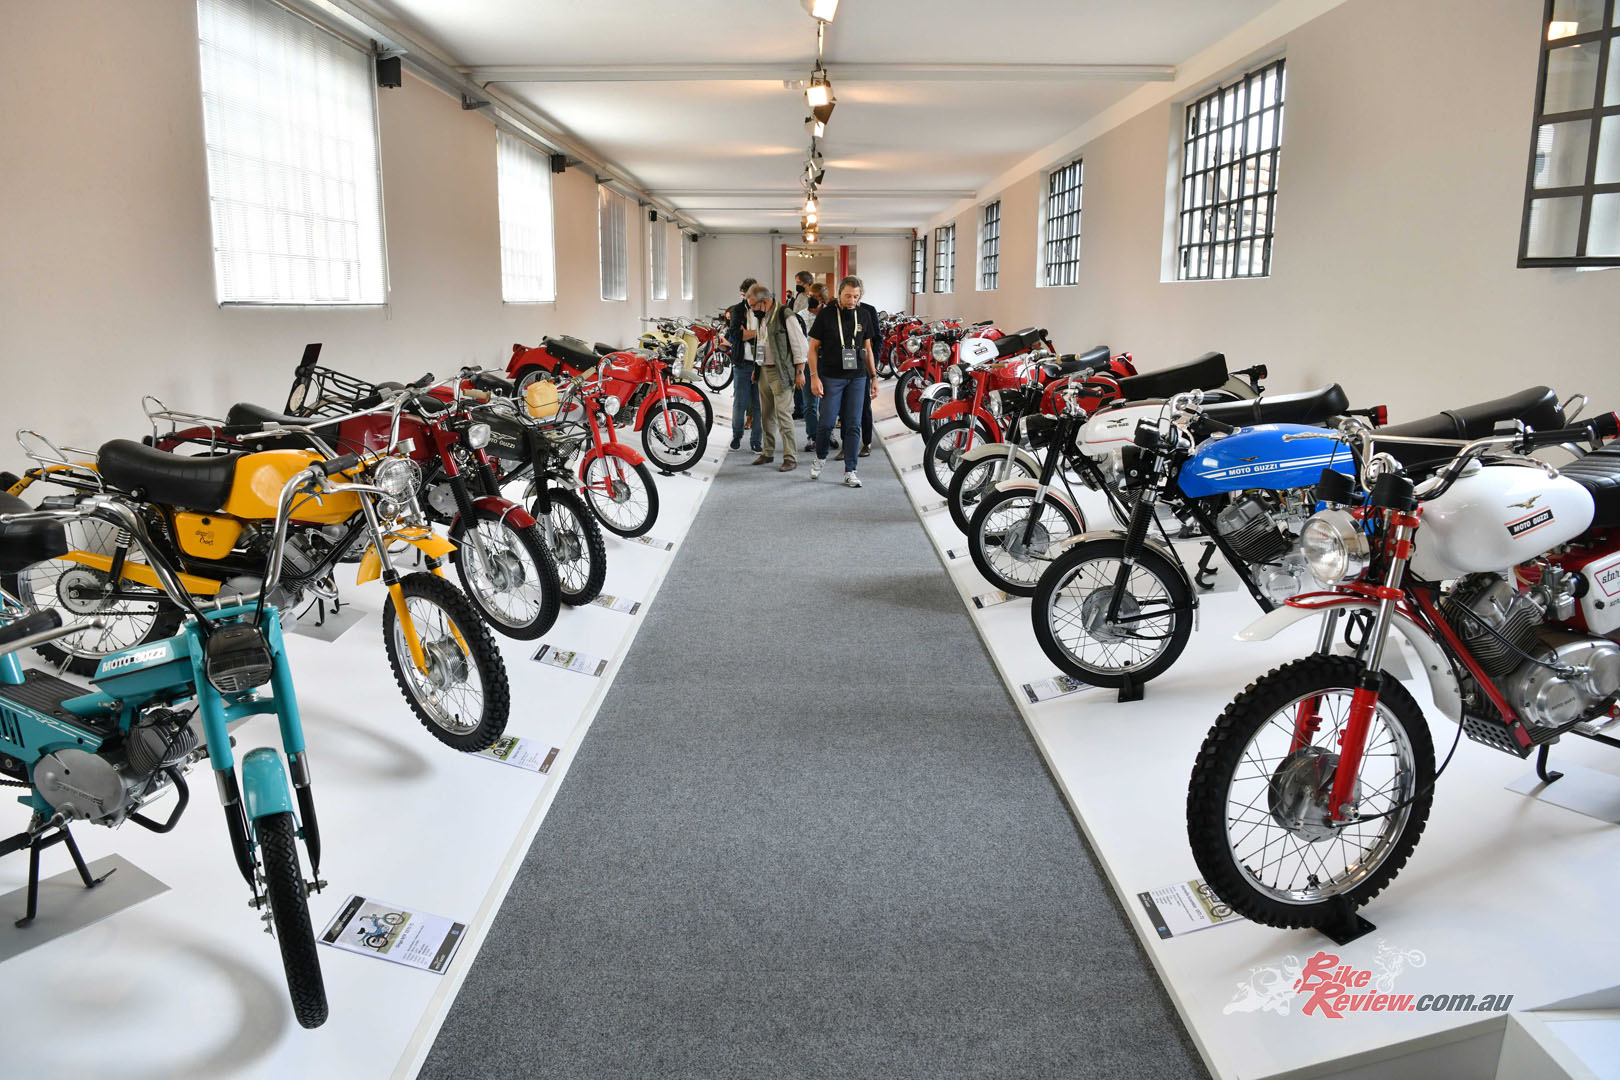 The museum offers enthusiasts a completely redesigned visitor experience, with the extraordinary bike collection.